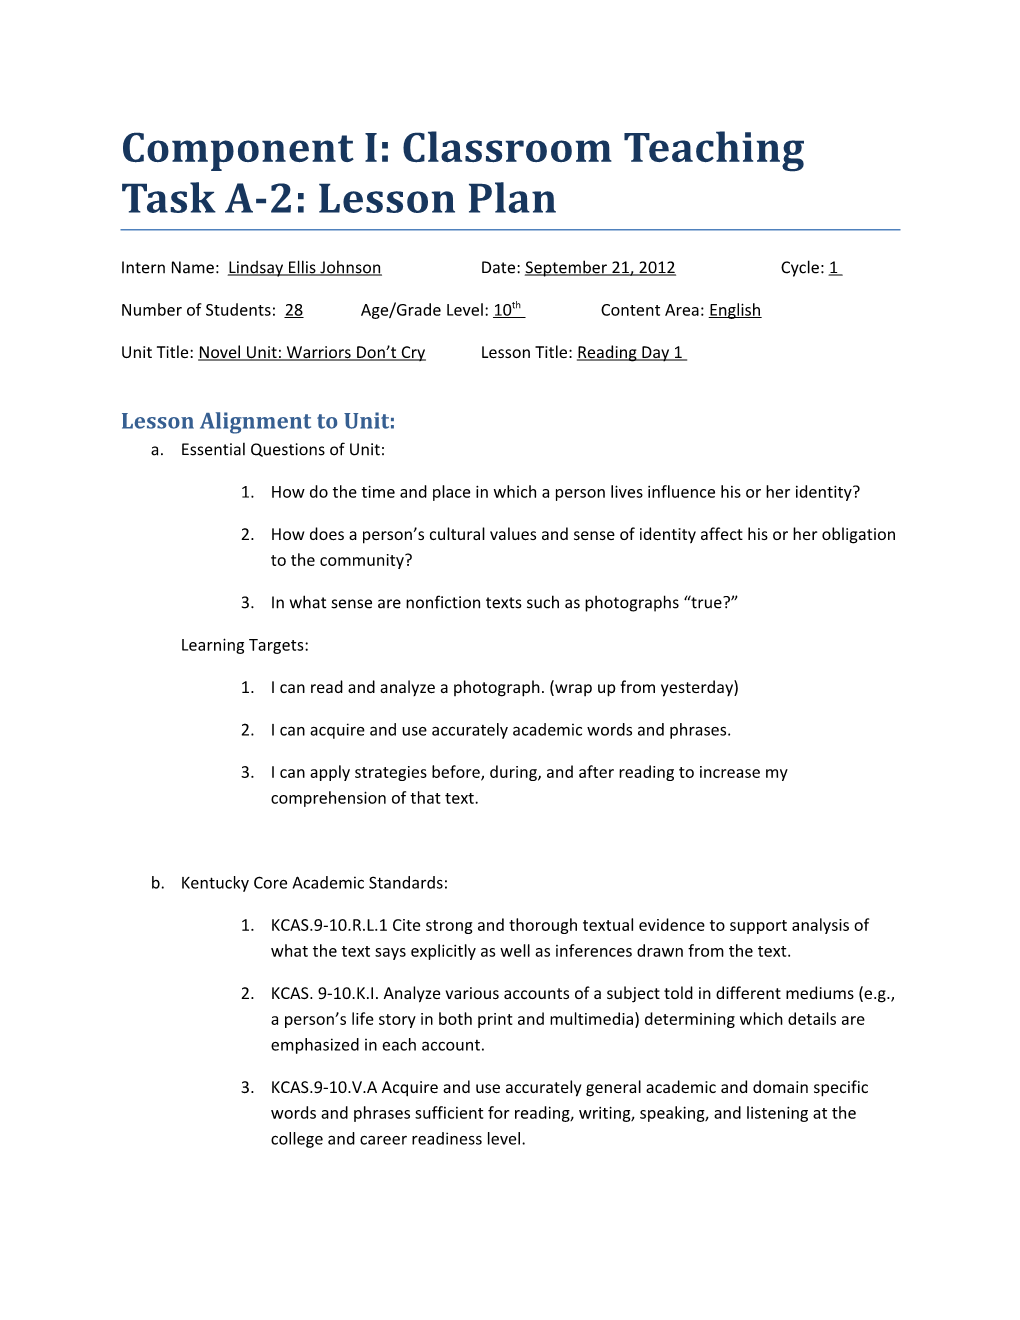 Component I: Classroom Teaching Task A-2: Lesson Plan